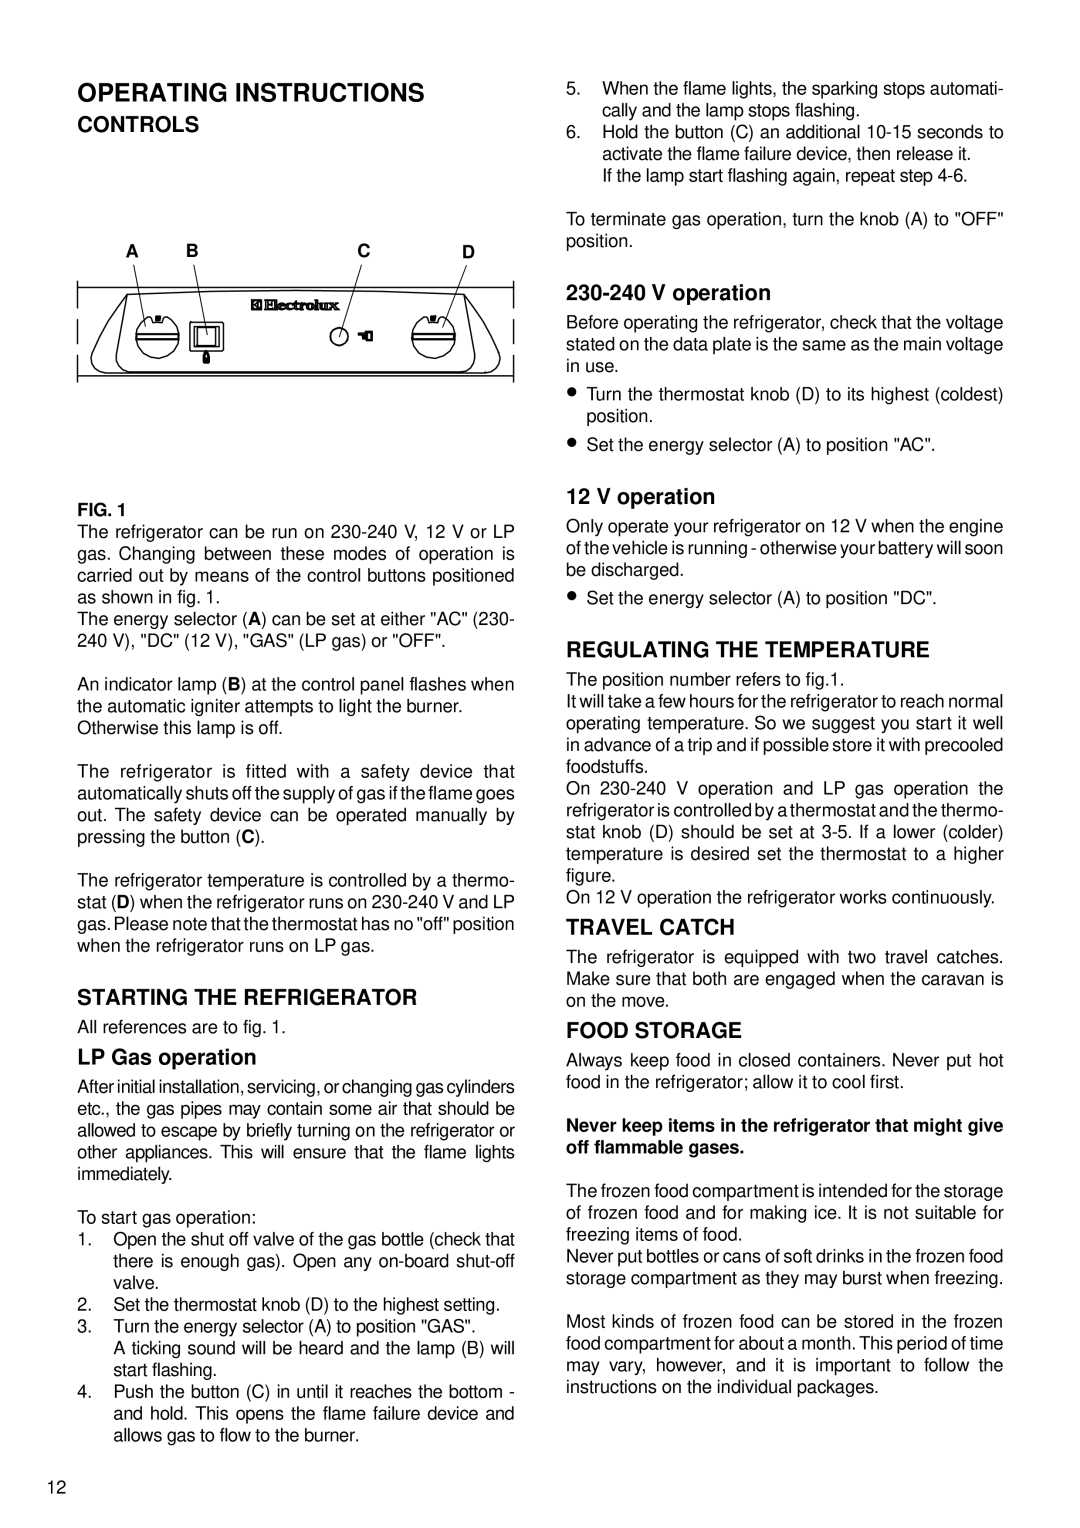 Electrolux RM 6501 manual Operating Instructions, Controls, Starting The Refrigerator, LP Gas operation, V operation 